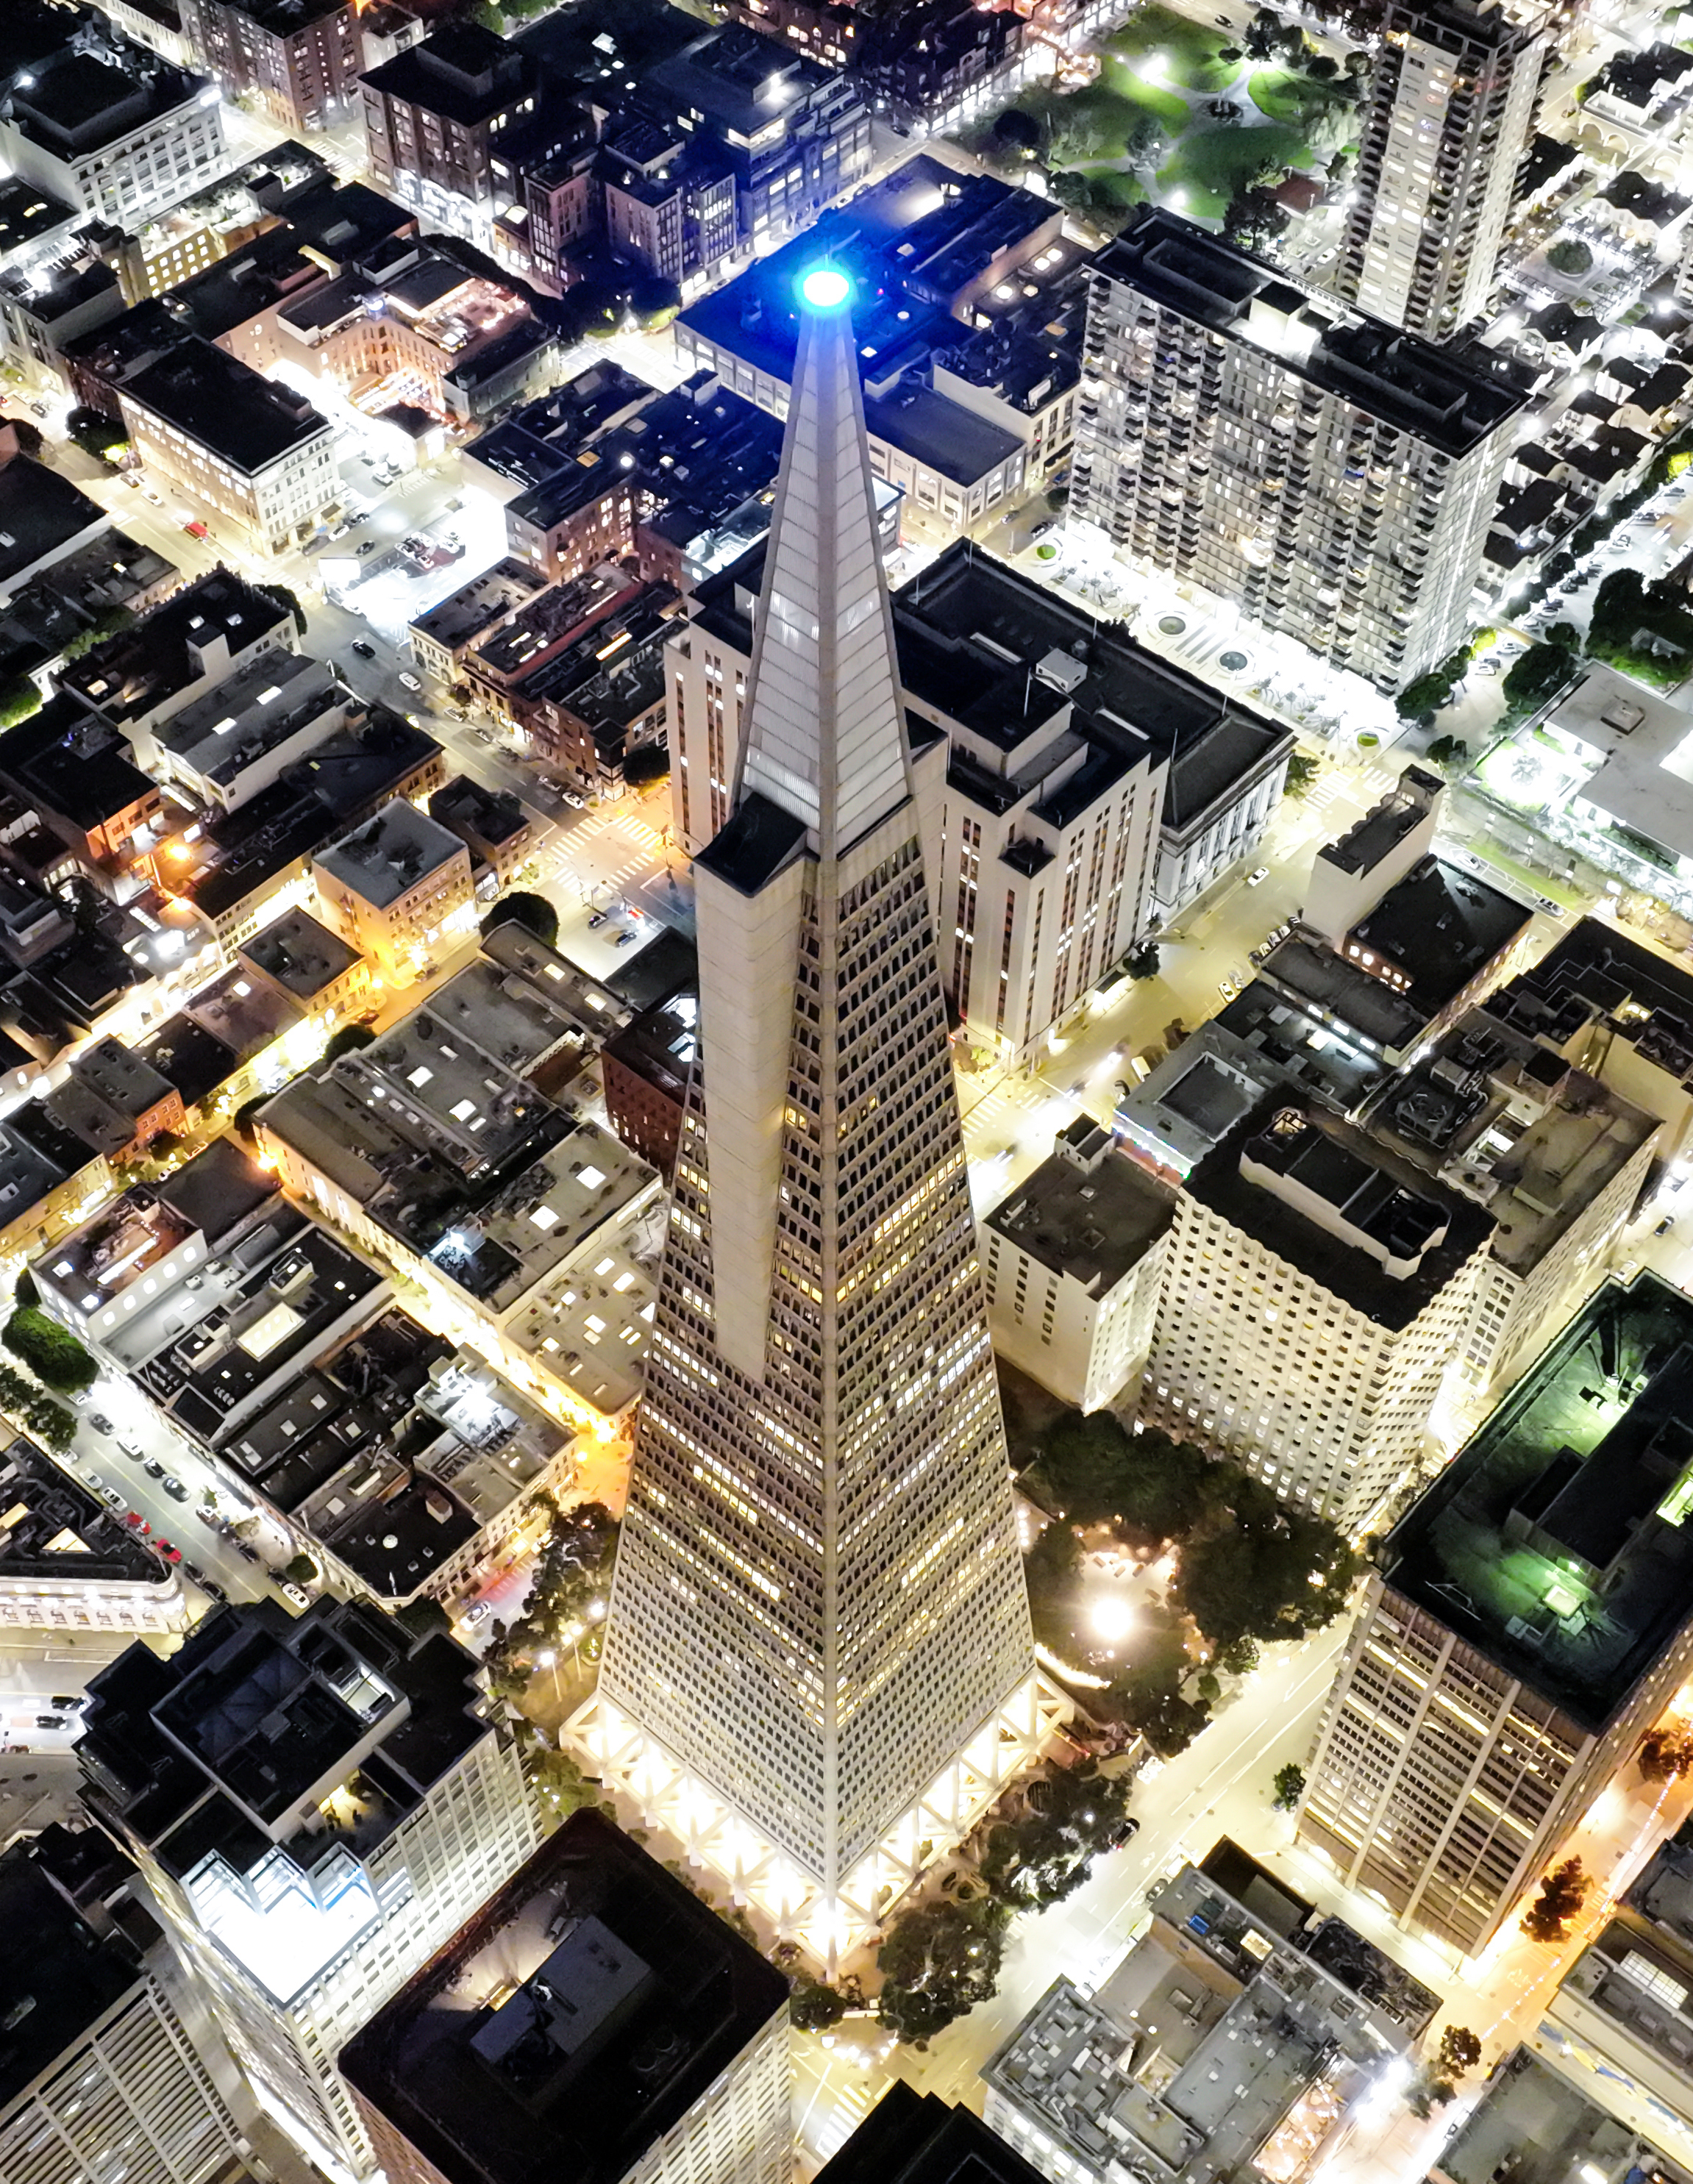 An aerial night view of a brightly lit, pyramid-topped skyscraper amid a grid of city streets.